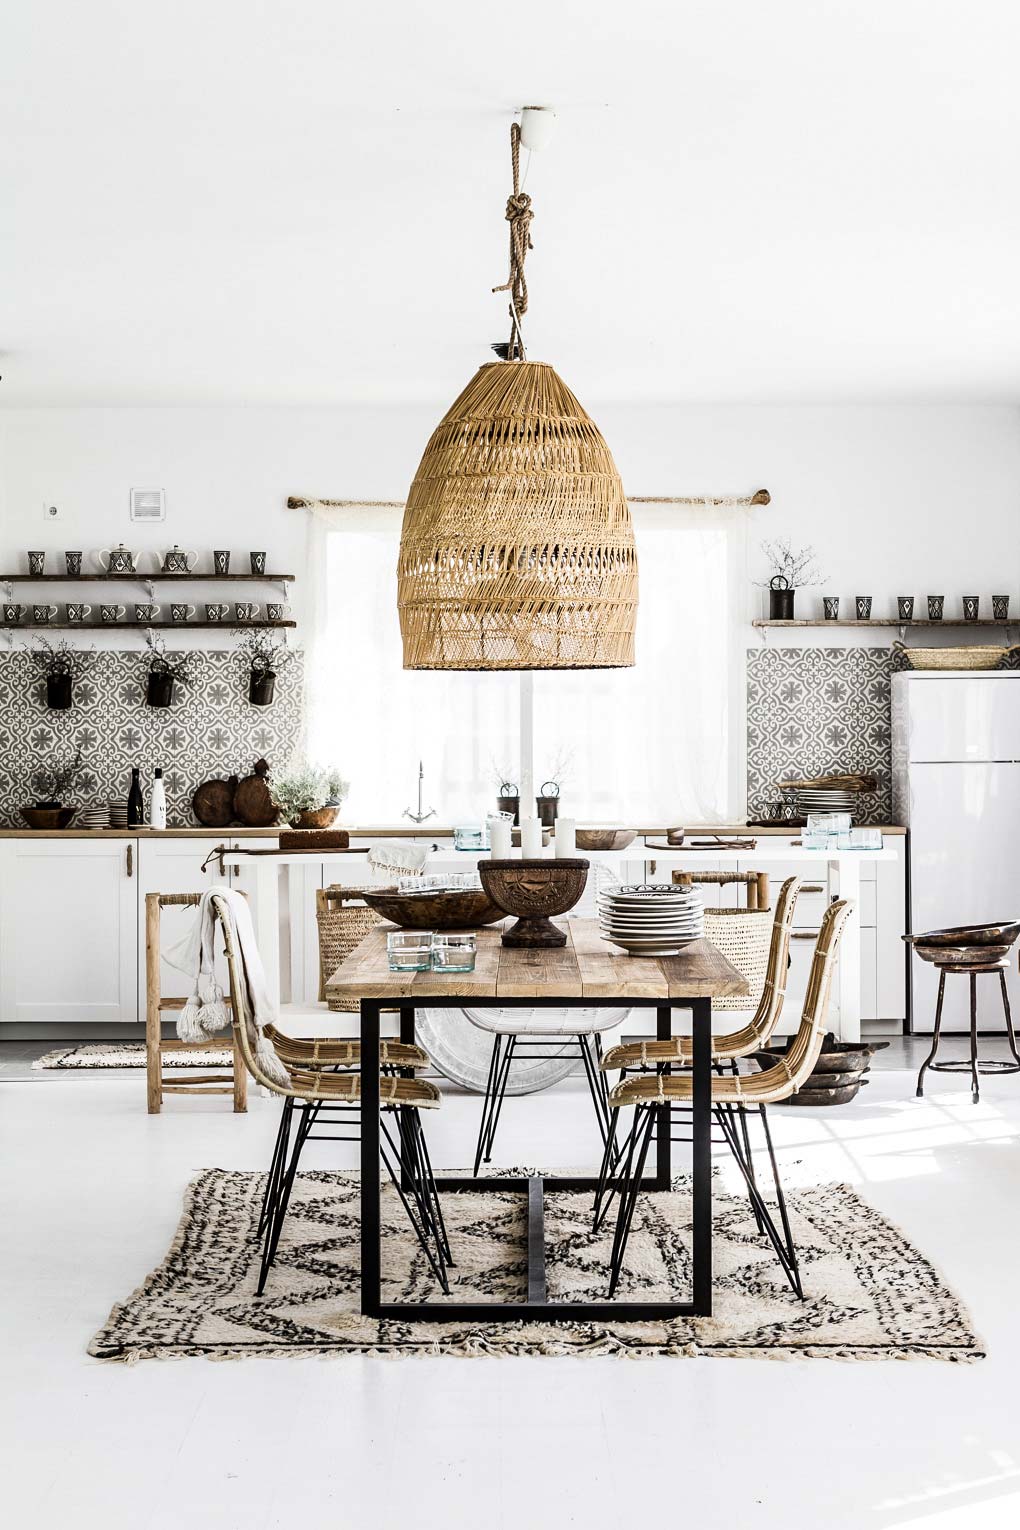 Moroccan style pendant light in kitchen